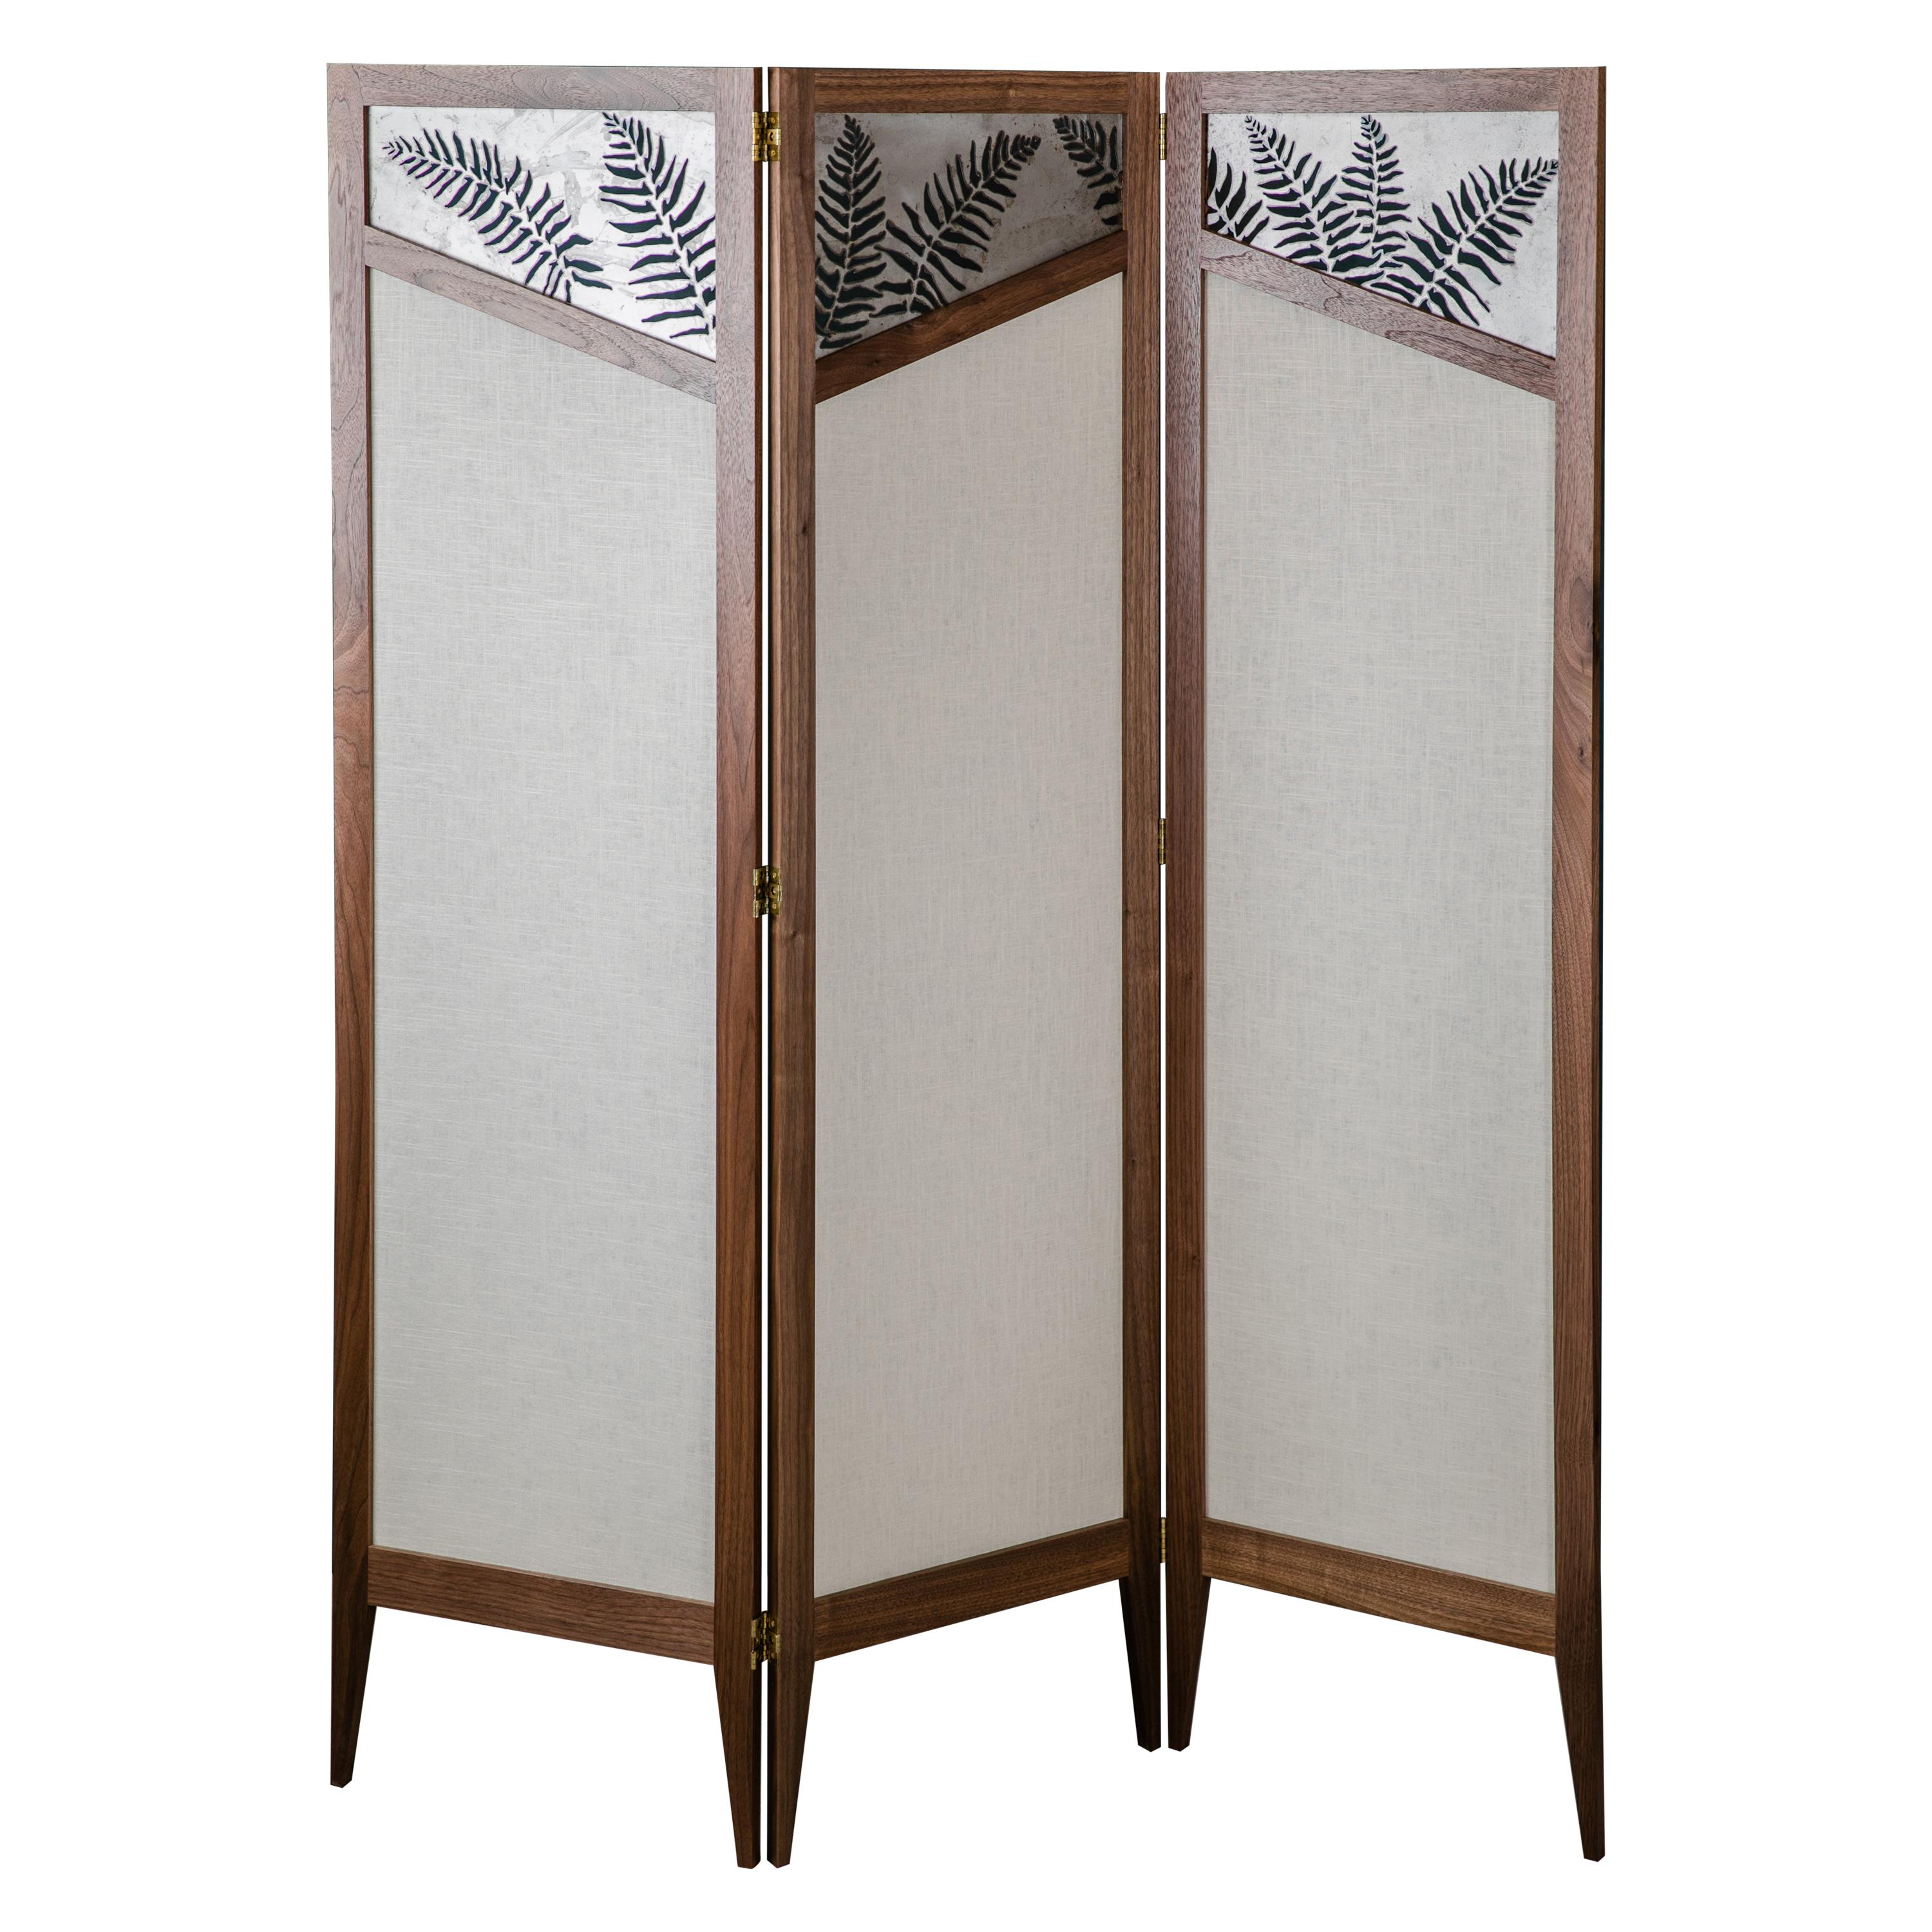 Tall Fern Folding Screen/Room Divider in Walnut with Metal and Fabric Screens